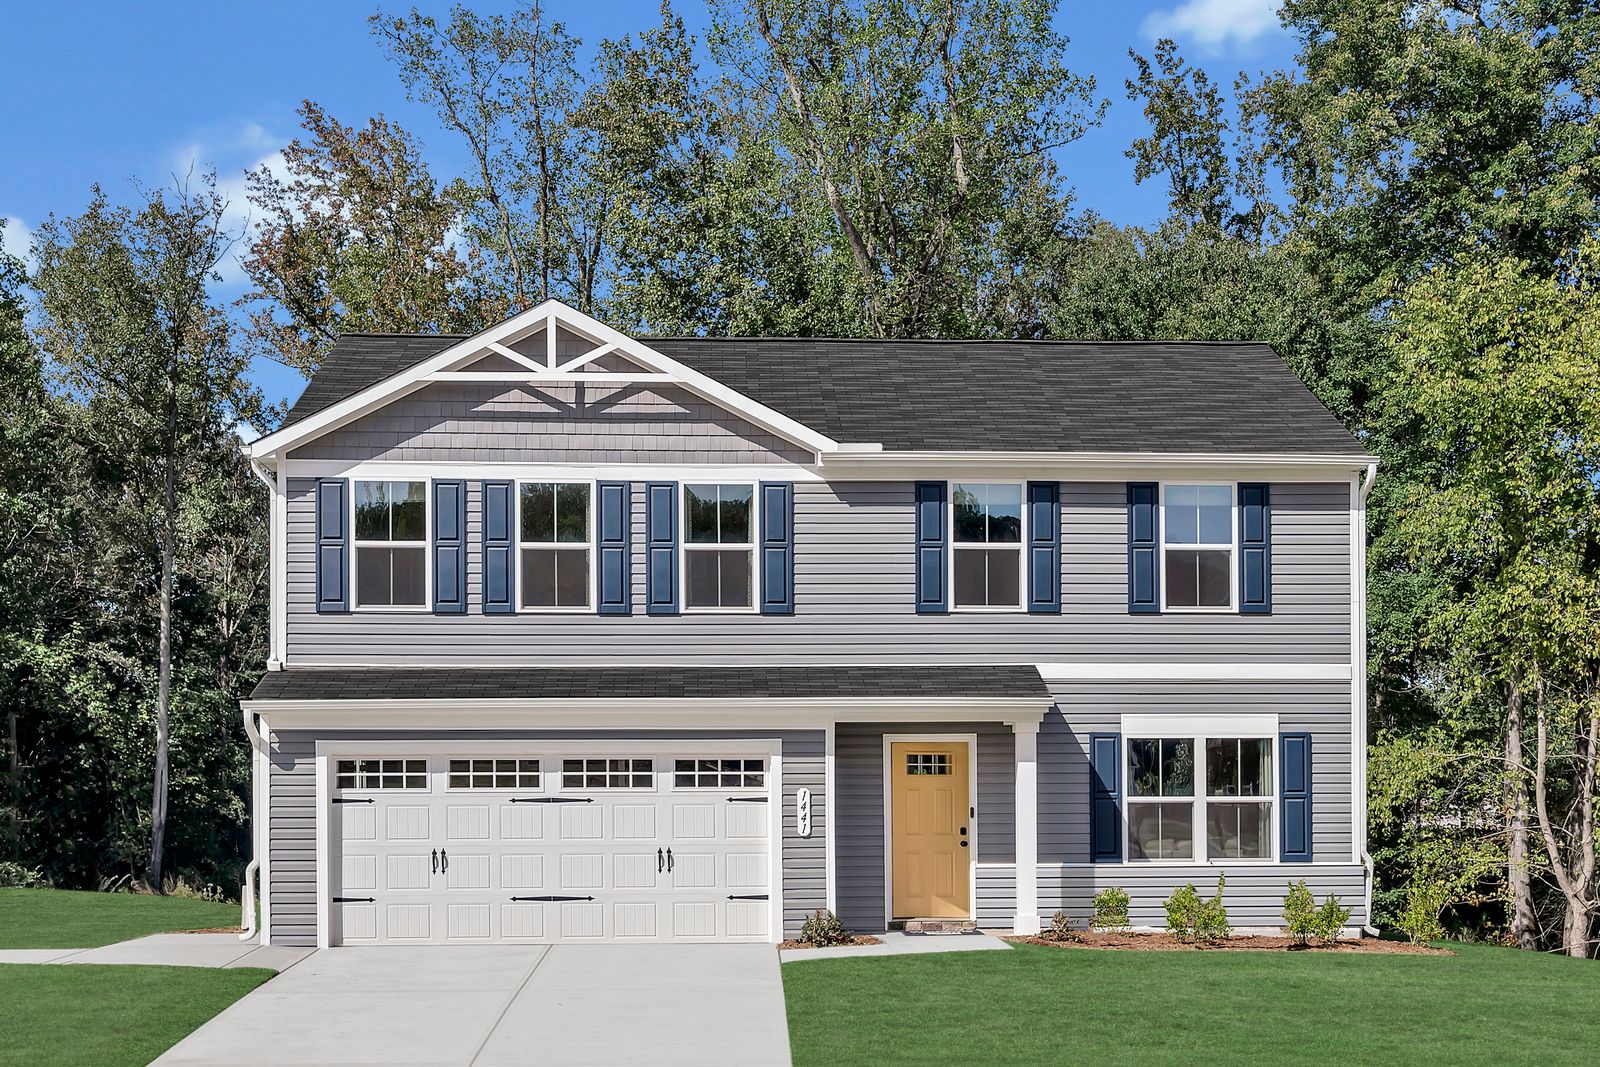 NEW TWO-STORY HOMES WITH EXCLUSIVE AMENITIES IN WENDELL FROM THE LOW $300s